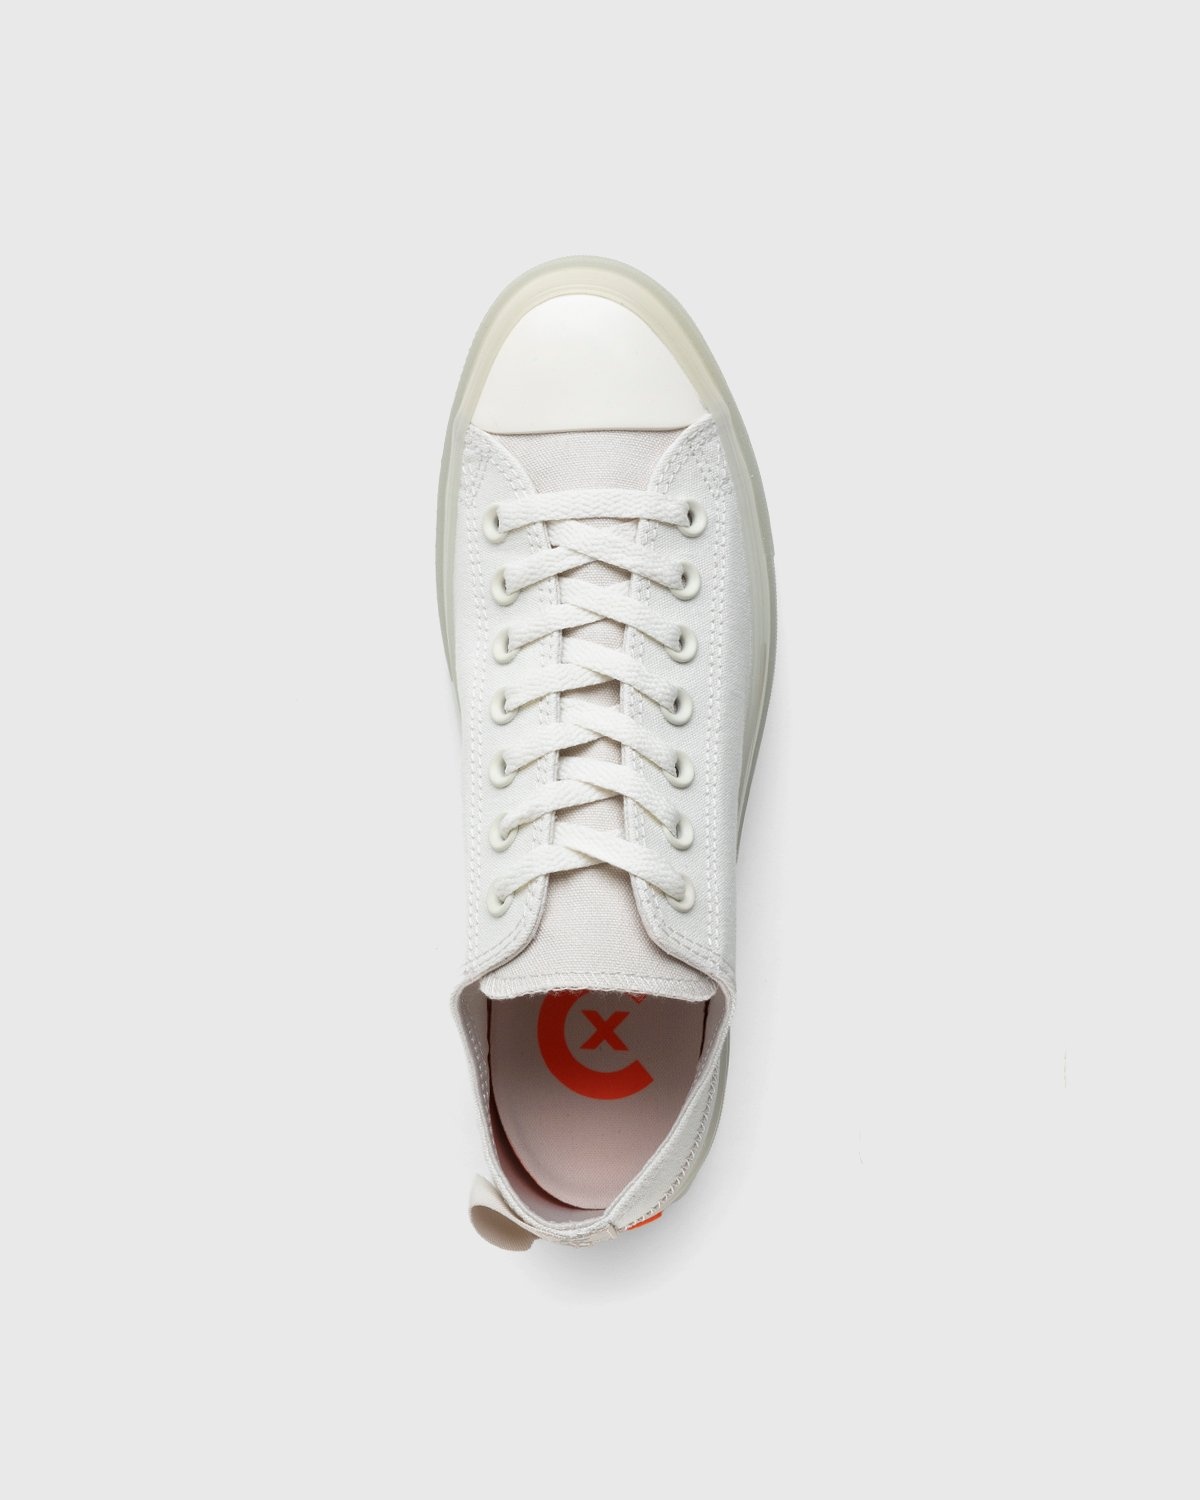 Converse – Chuck Taylor All Star CX Egret/Desert Sand - Low Top Sneakers - Grey - Image 5